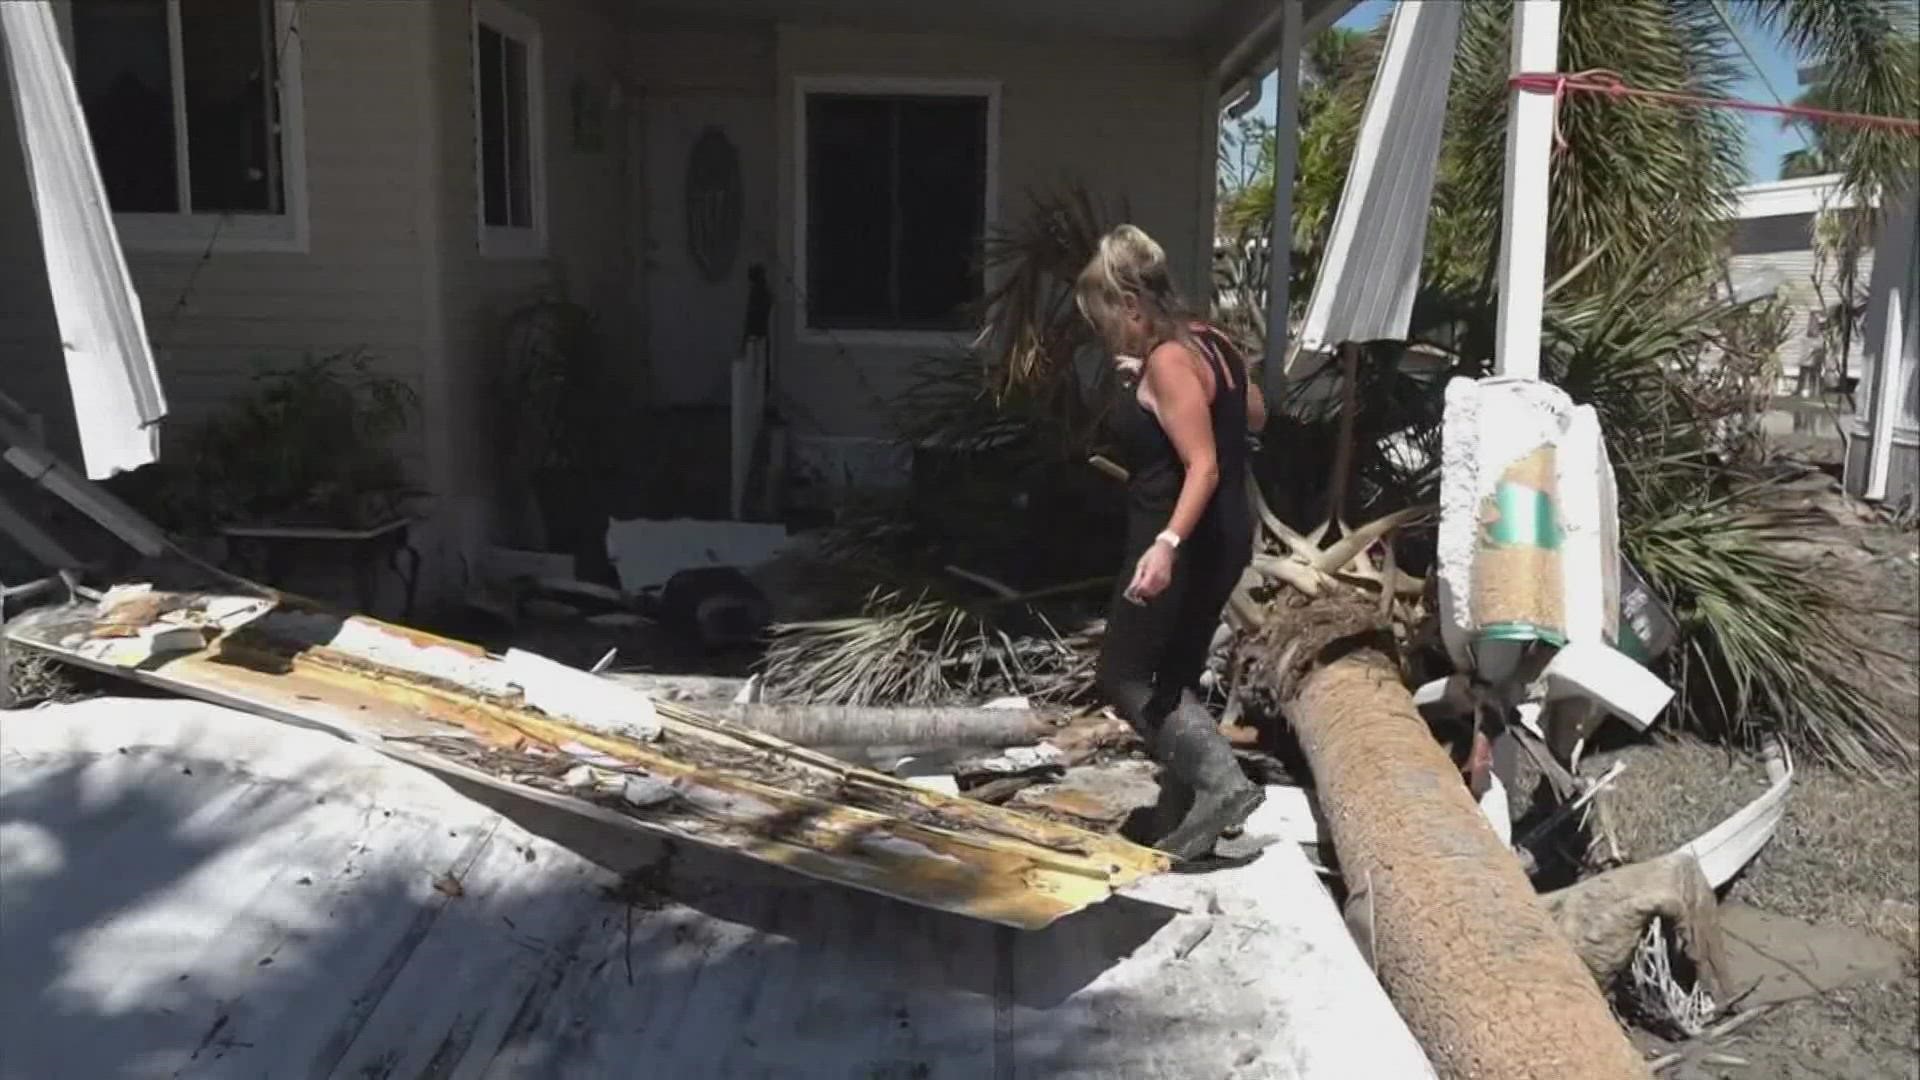 Hurricane Ian has become one of the deadliest storms in the U.S. in recent memory.